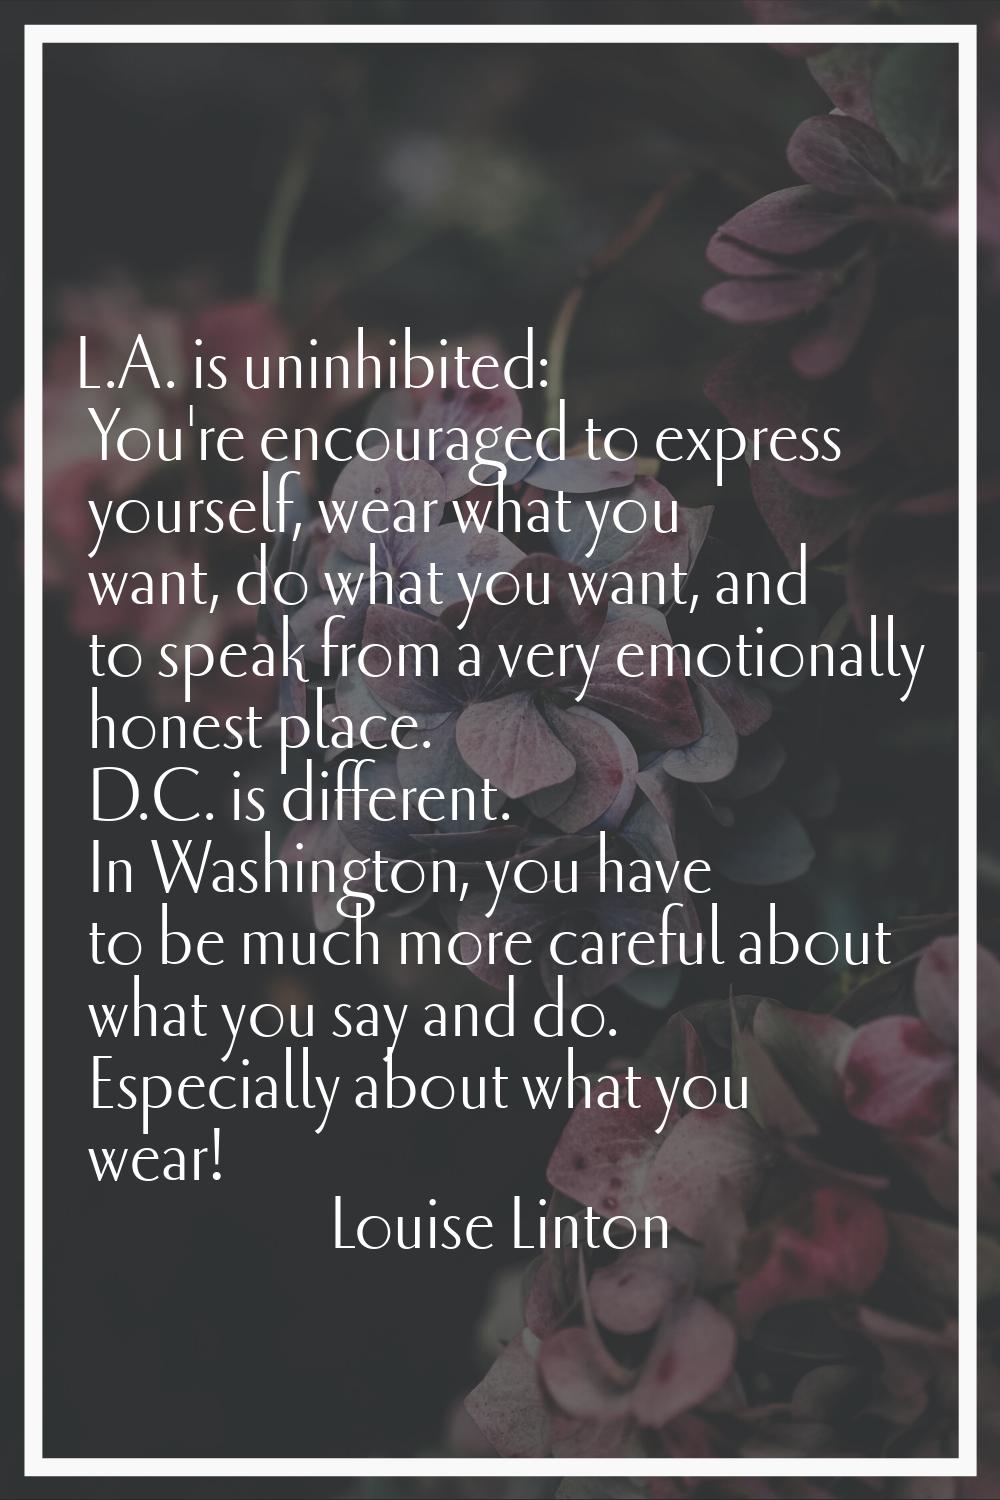 L.A. is uninhibited: You're encouraged to express yourself, wear what you want, do what you want, a